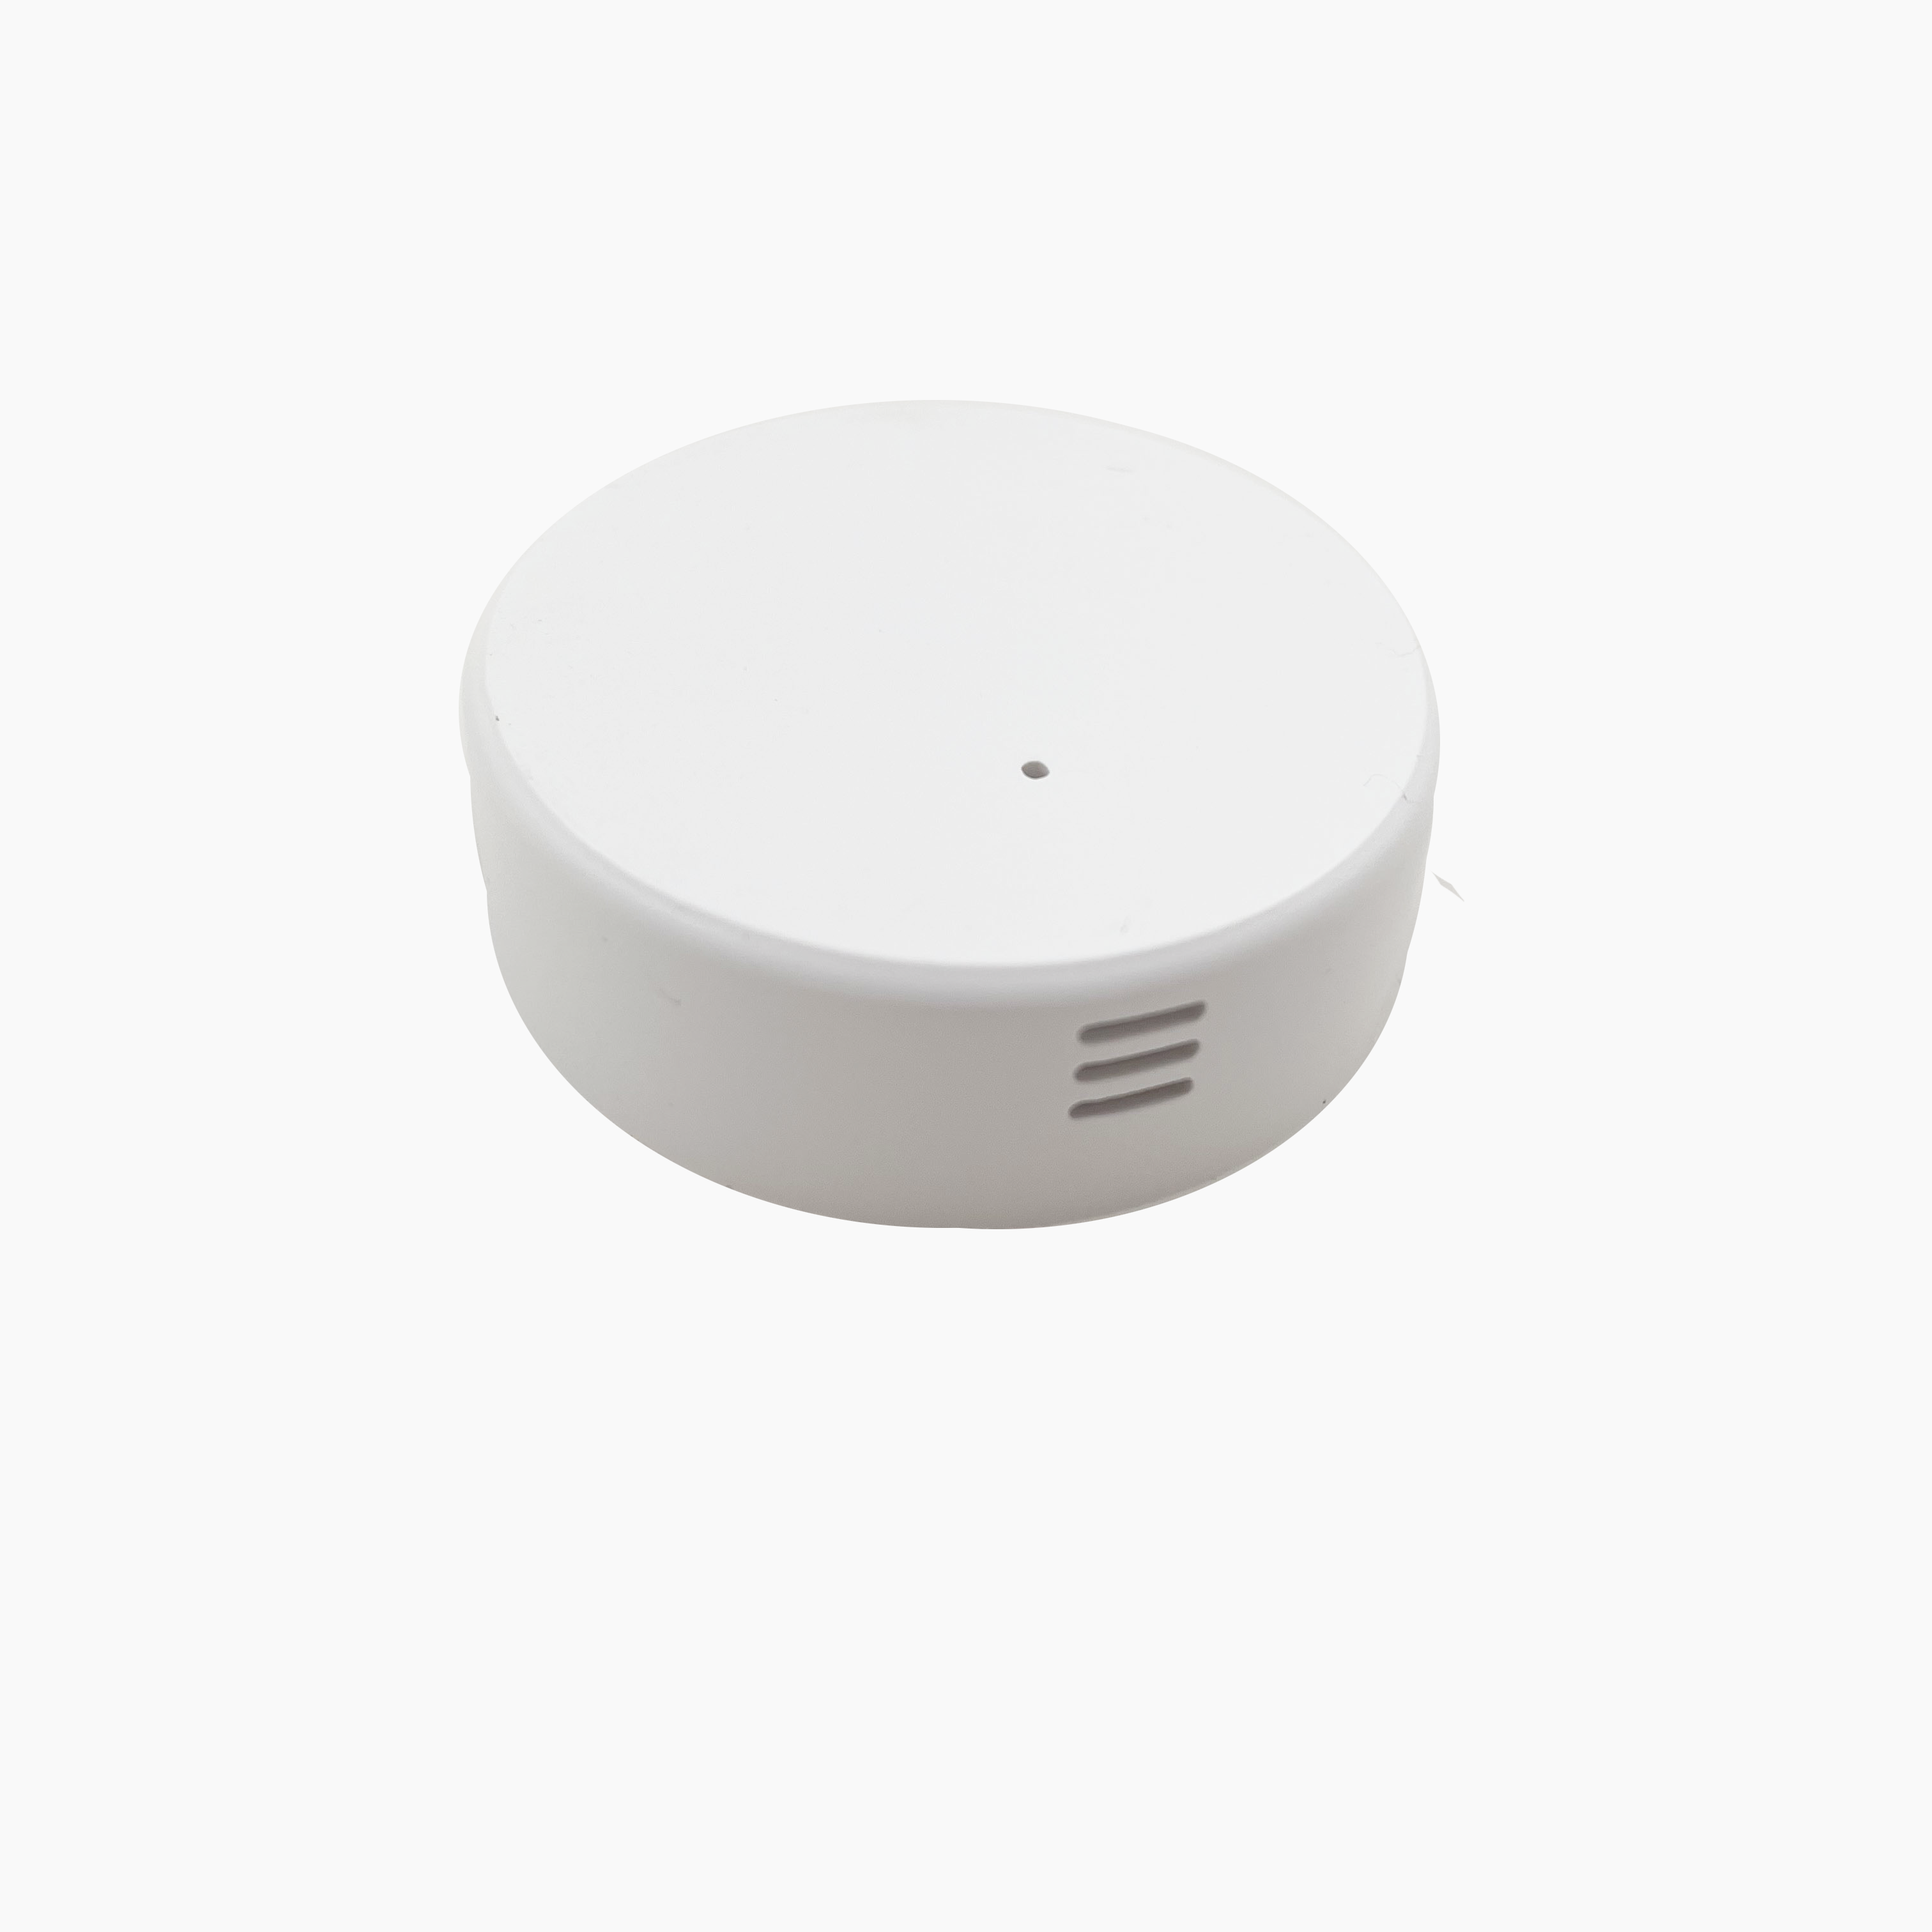 Bluetooth 5.0 Wireless Cold Chain Temperature and Humidity Sensor